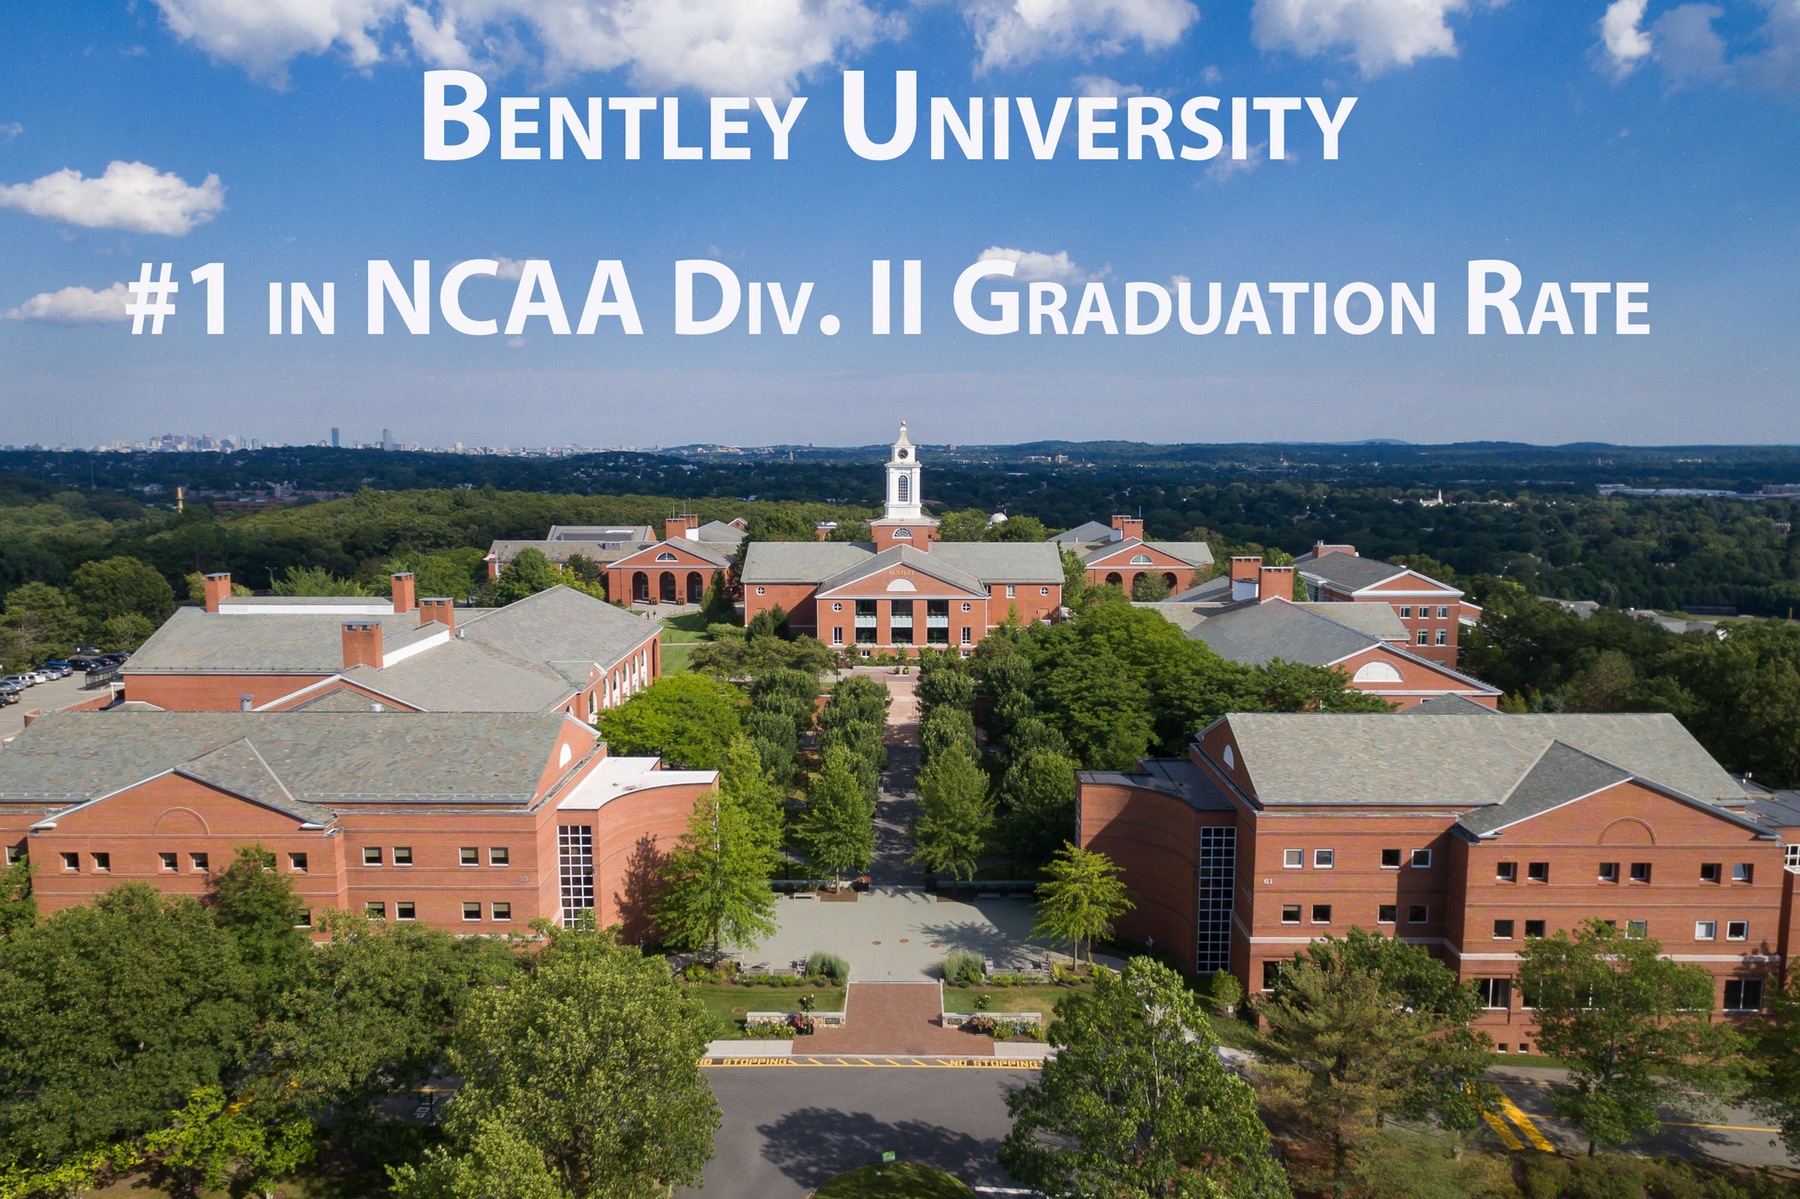 Bentley Student-Athletes Have Highest Graduation Rate in Division II